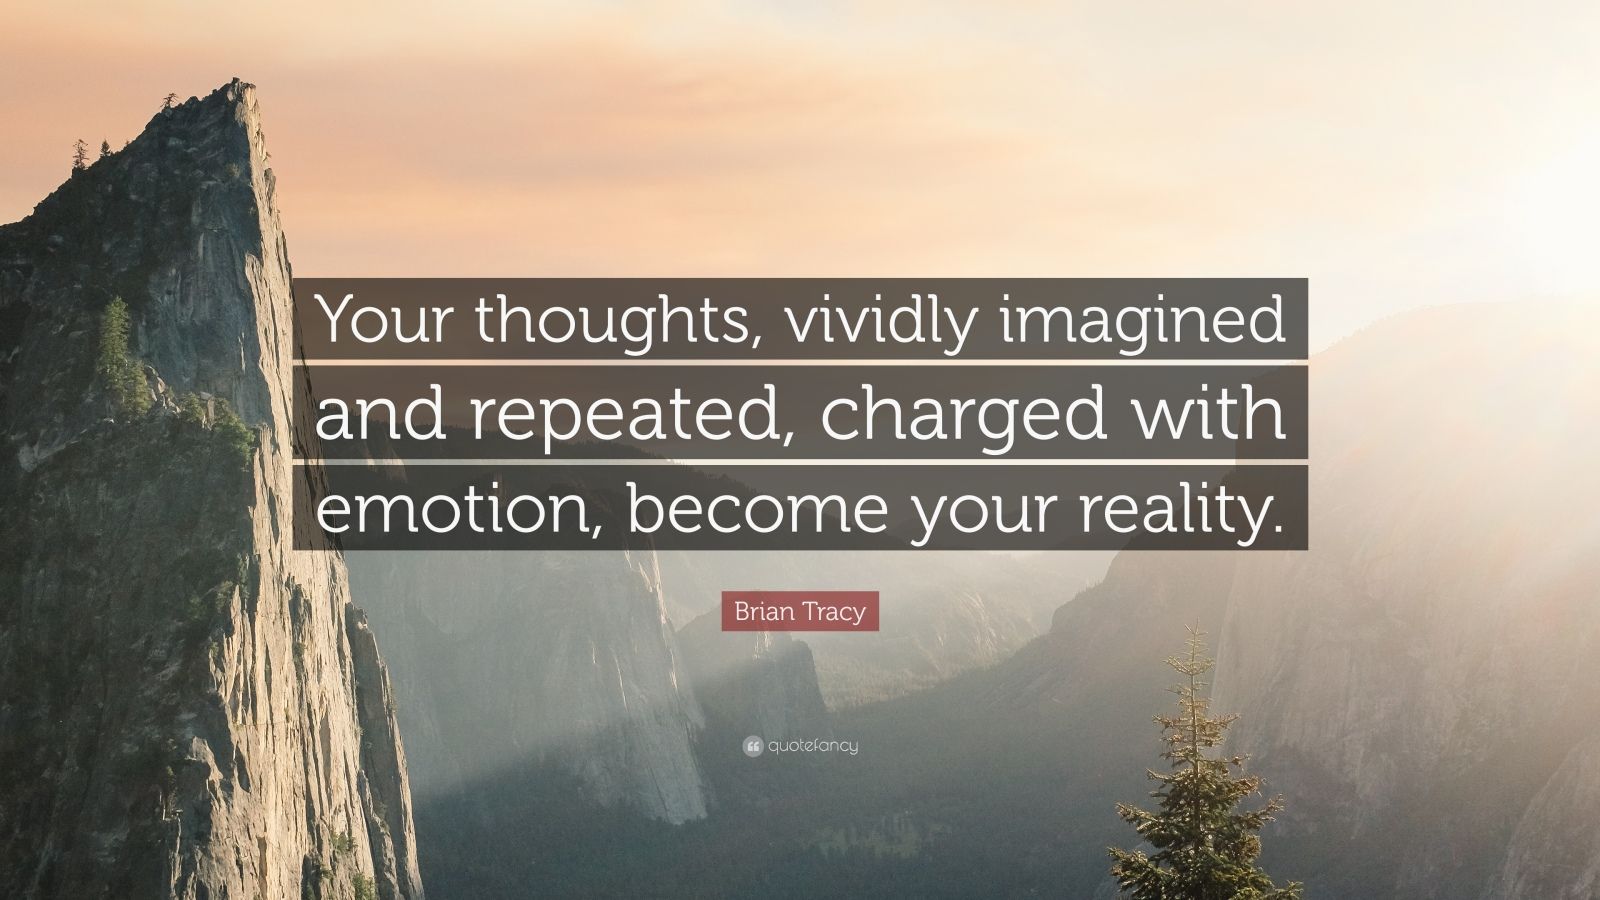 imagined and repeated, charged with emotion, become your reality